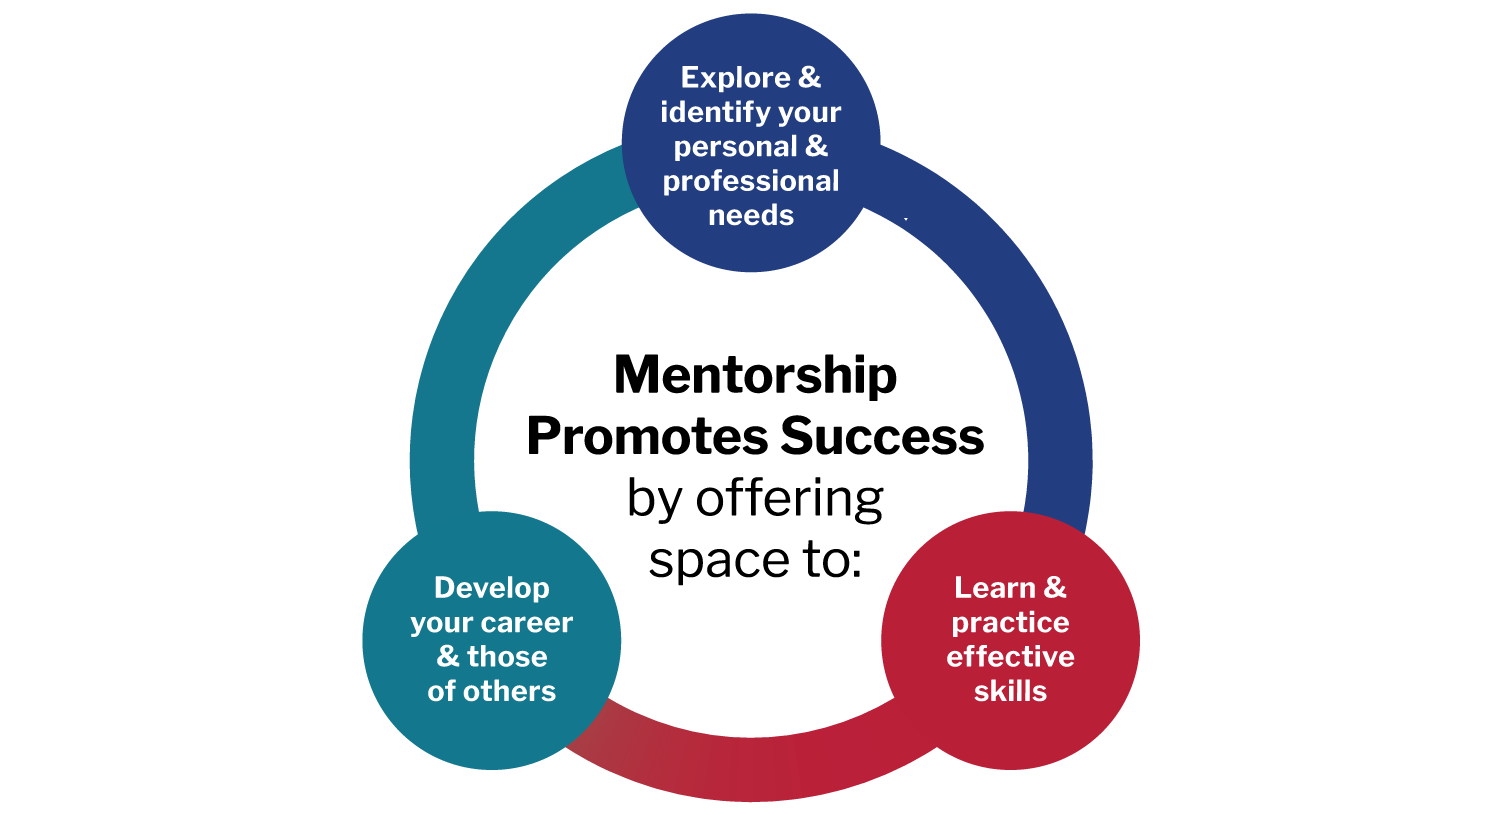 Mentoring promotes success by offering space to: Explore & identify your personal & professional needs. Develop your career & those of others. Learn & practice effective skills. 